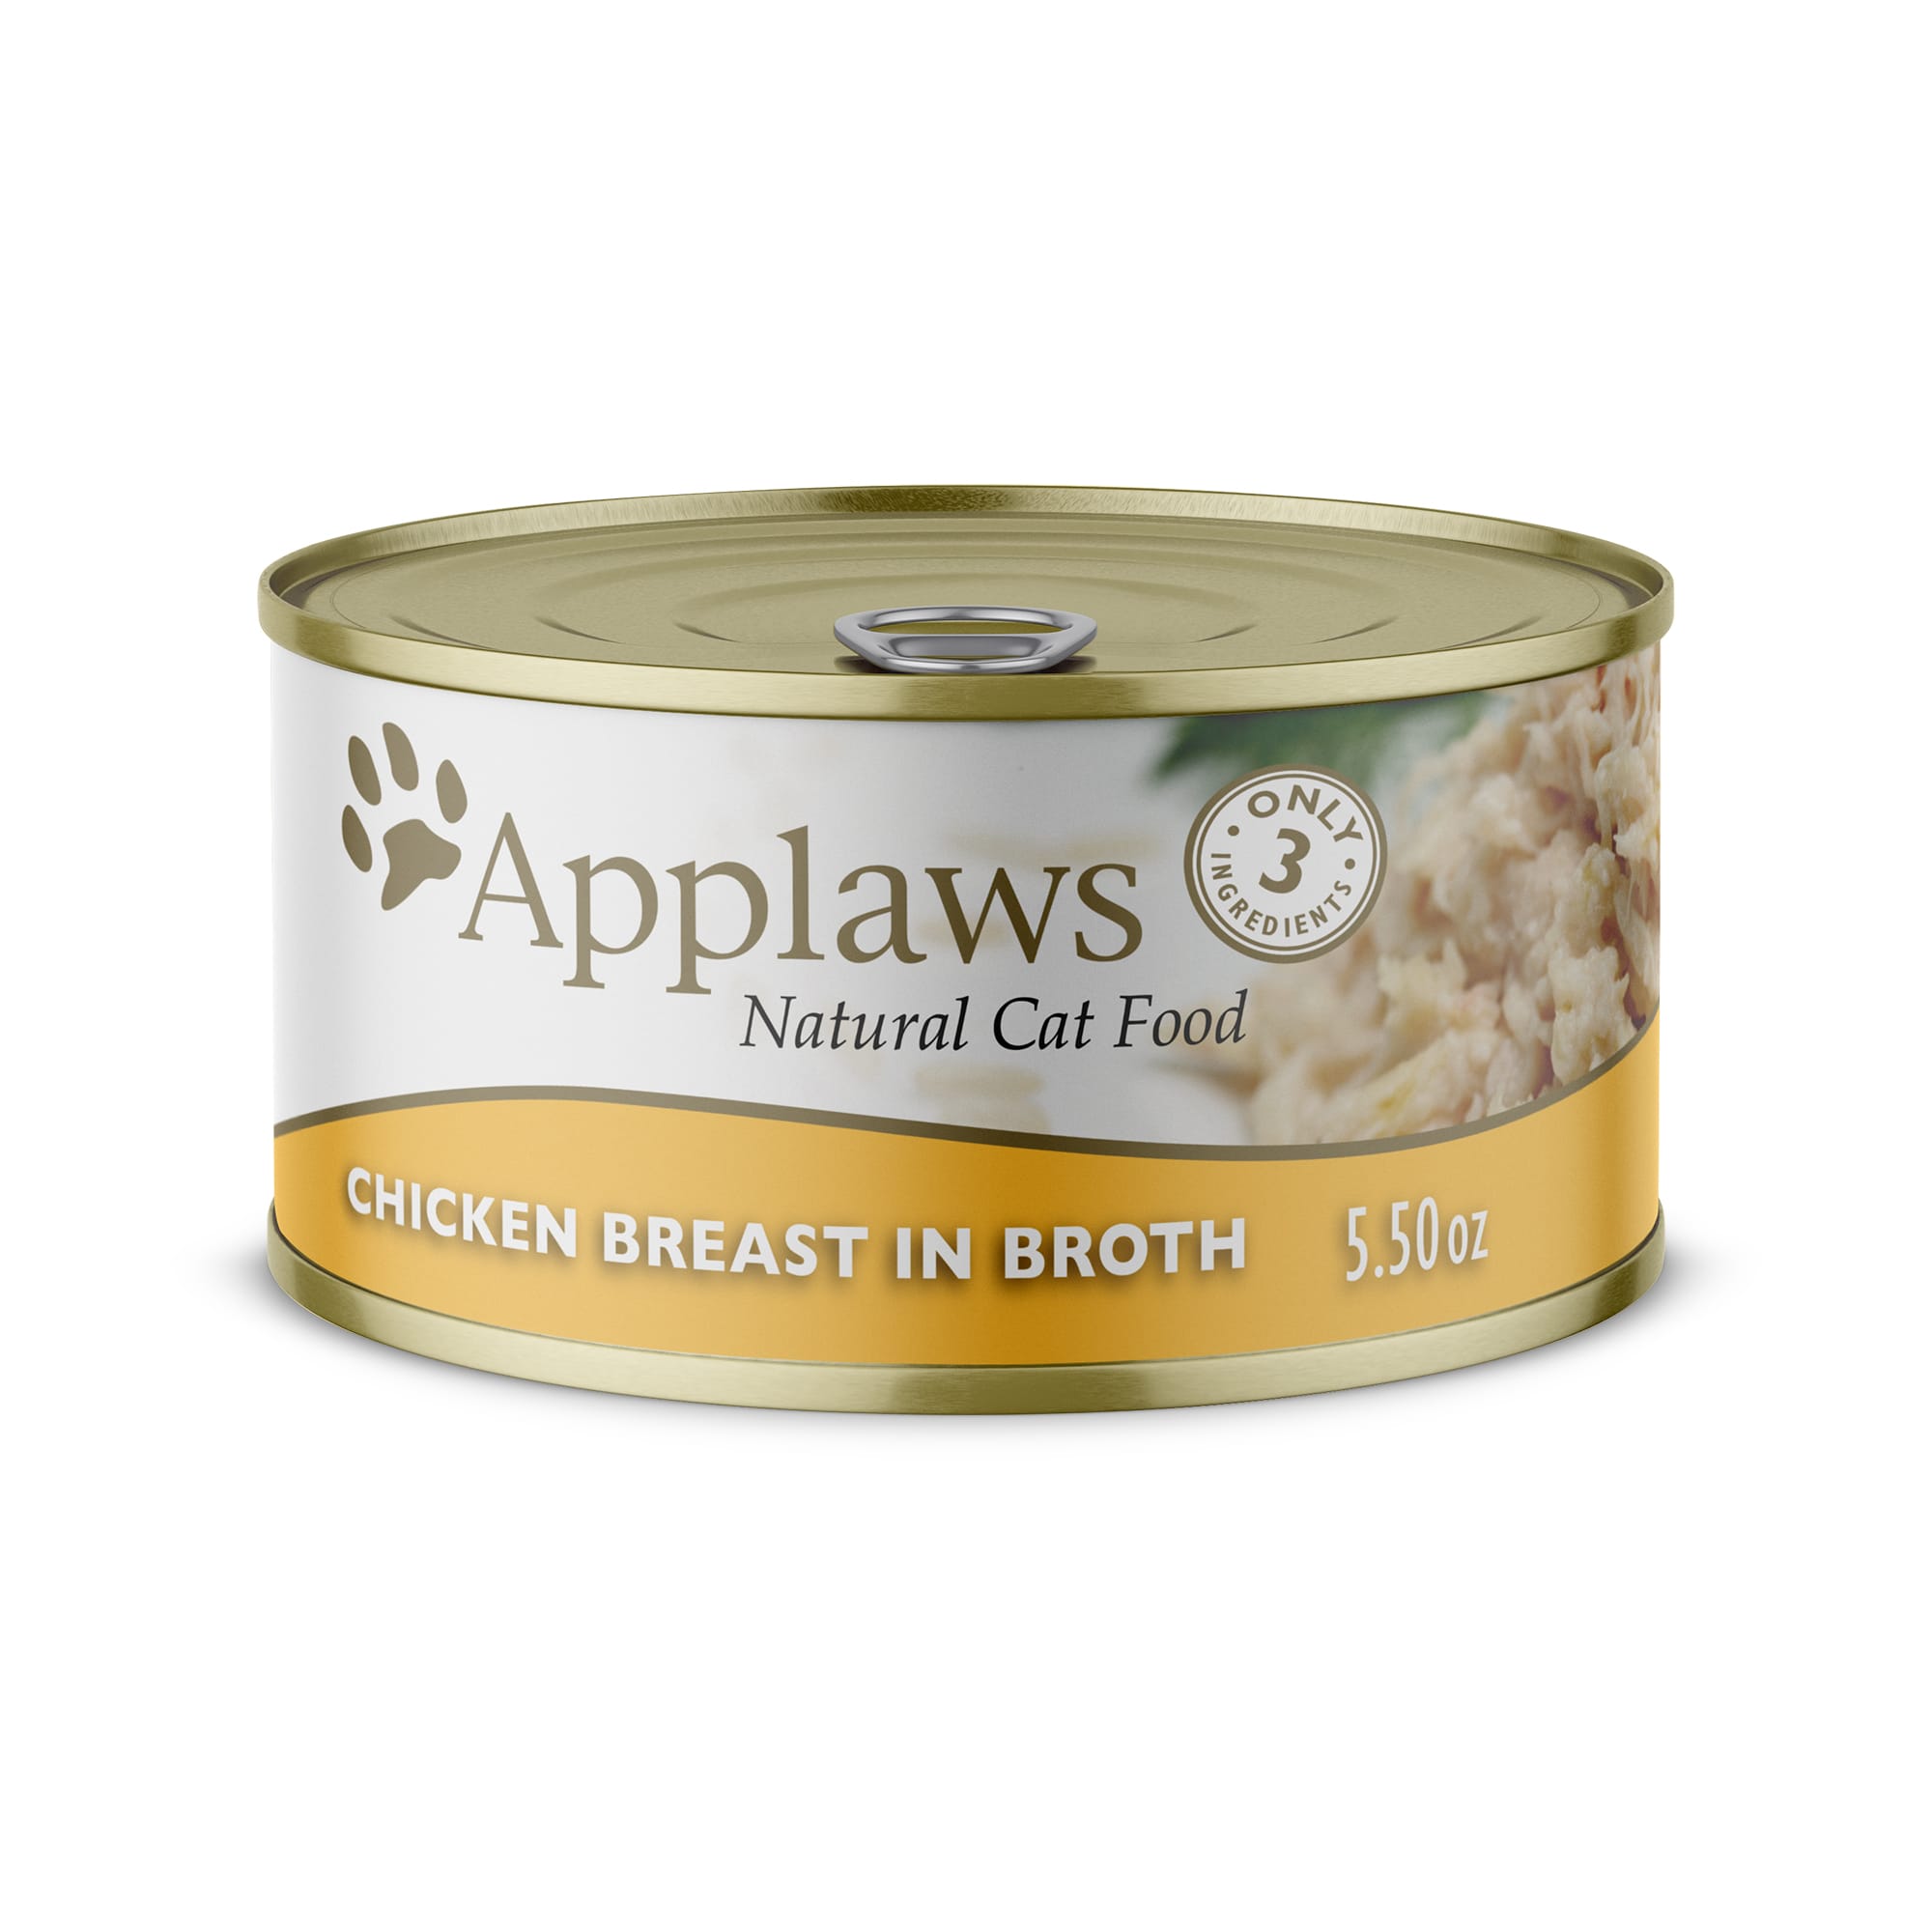 Applaws Natural Chicken Breast in Broth Wet Cat Food, 5.5 oz., Case of 24, 24 X 5.5 OZ